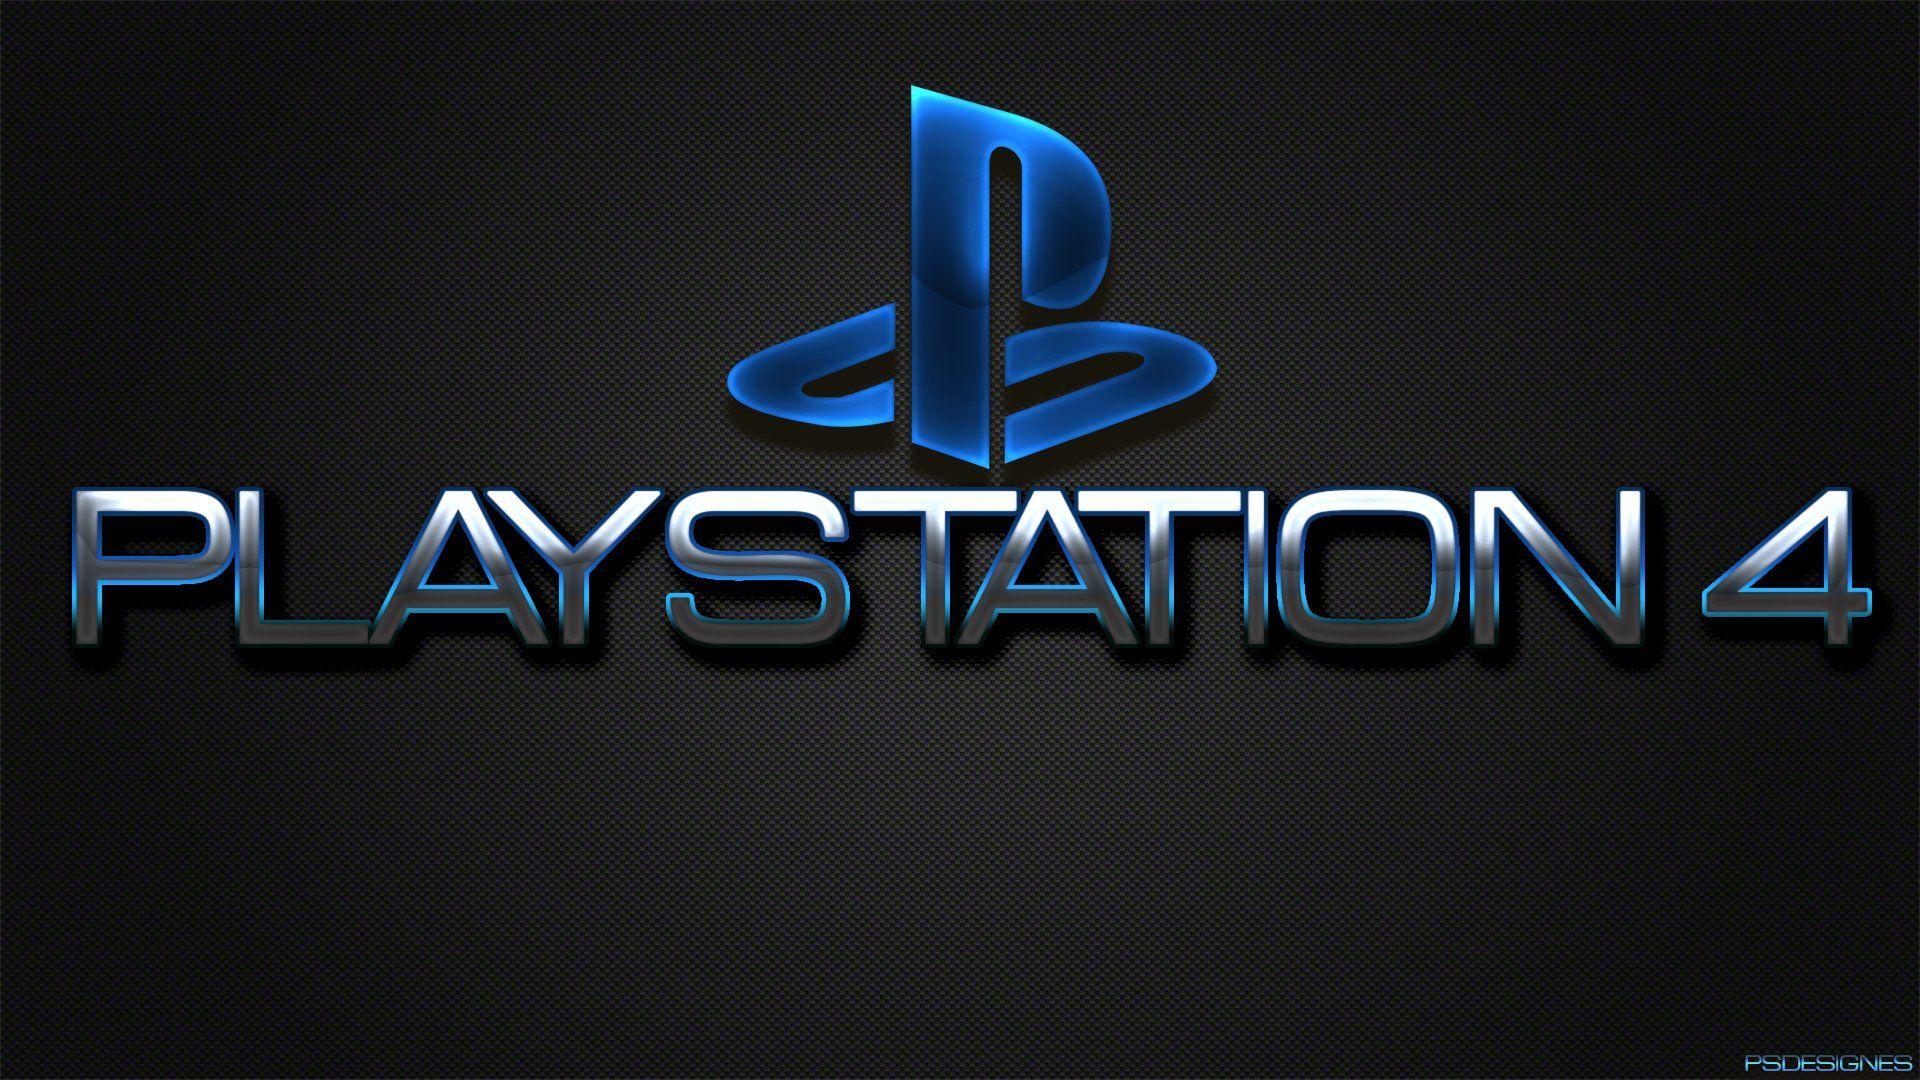 PS4 PlayStation 4 Logo - Sony PlayStation 4 Wallpapers, Pictures, Images